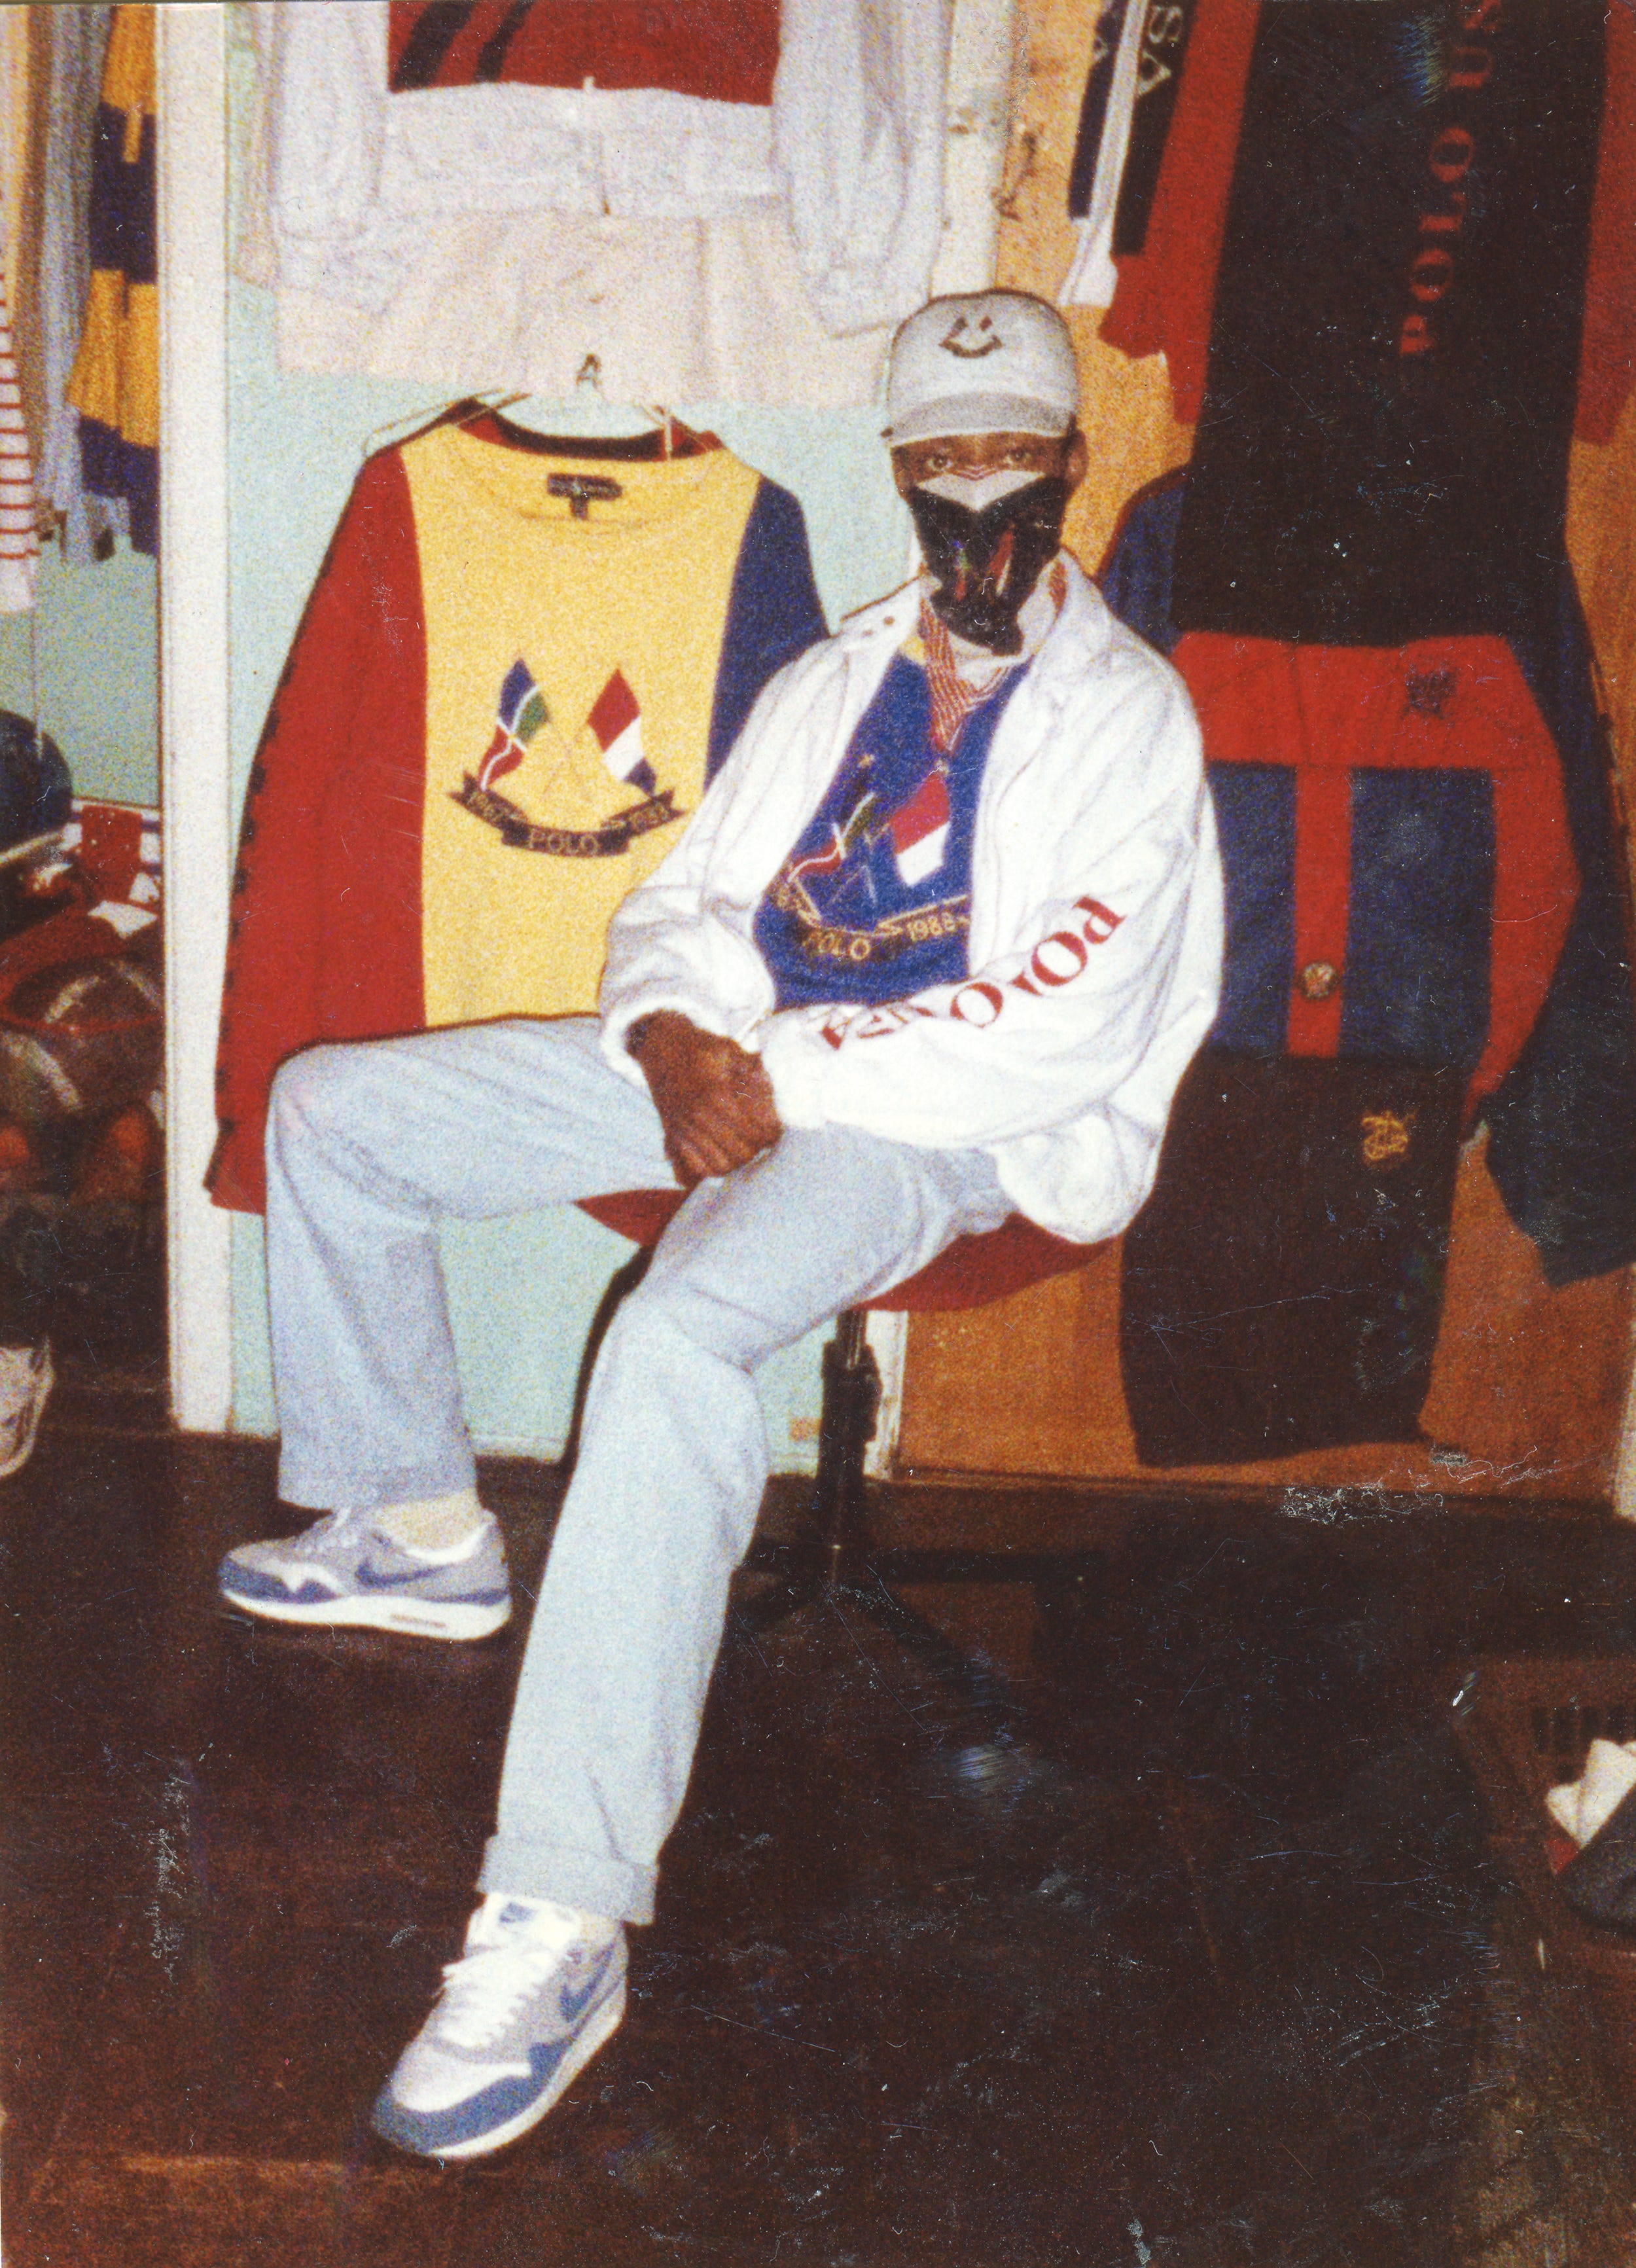 Photos: When Polo brought hip-hop fashion to the country club | by Rian  Dundon | Timeline